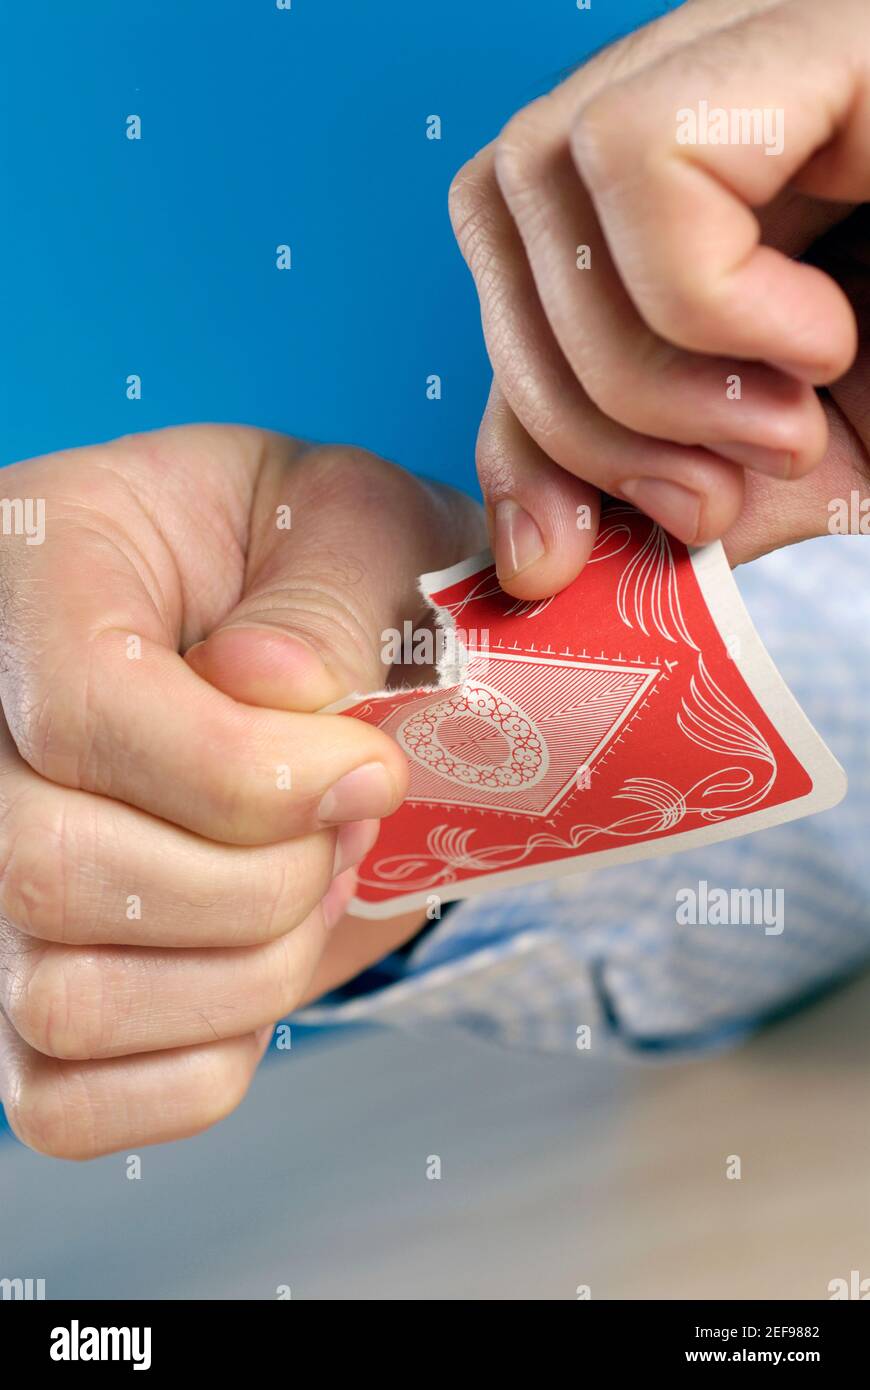 Close-up of a personÅ½s hands tearing a card Stock Photo